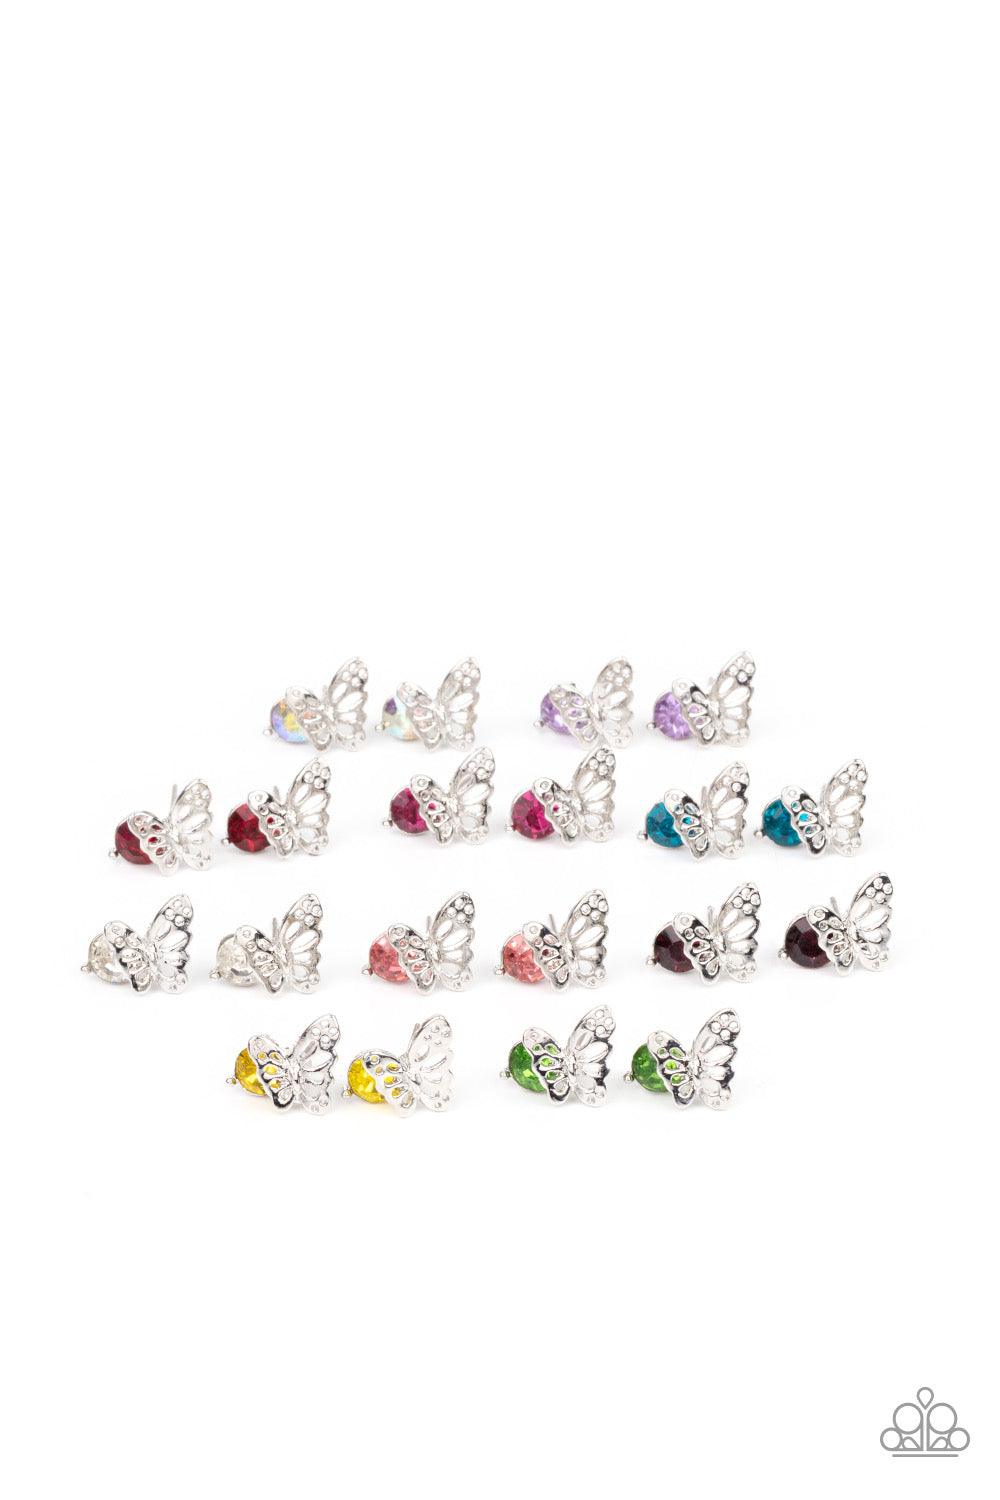 Paparazzi Accessories Starlet Shimmer Earrings #21 - Blue Airy silver butterfly frames featuring glittery rhinestones vary in shades of green, yellow purple, pink, white, blue, red, purple, and multicolored. Earrings attach to standard post fittings. Jewe